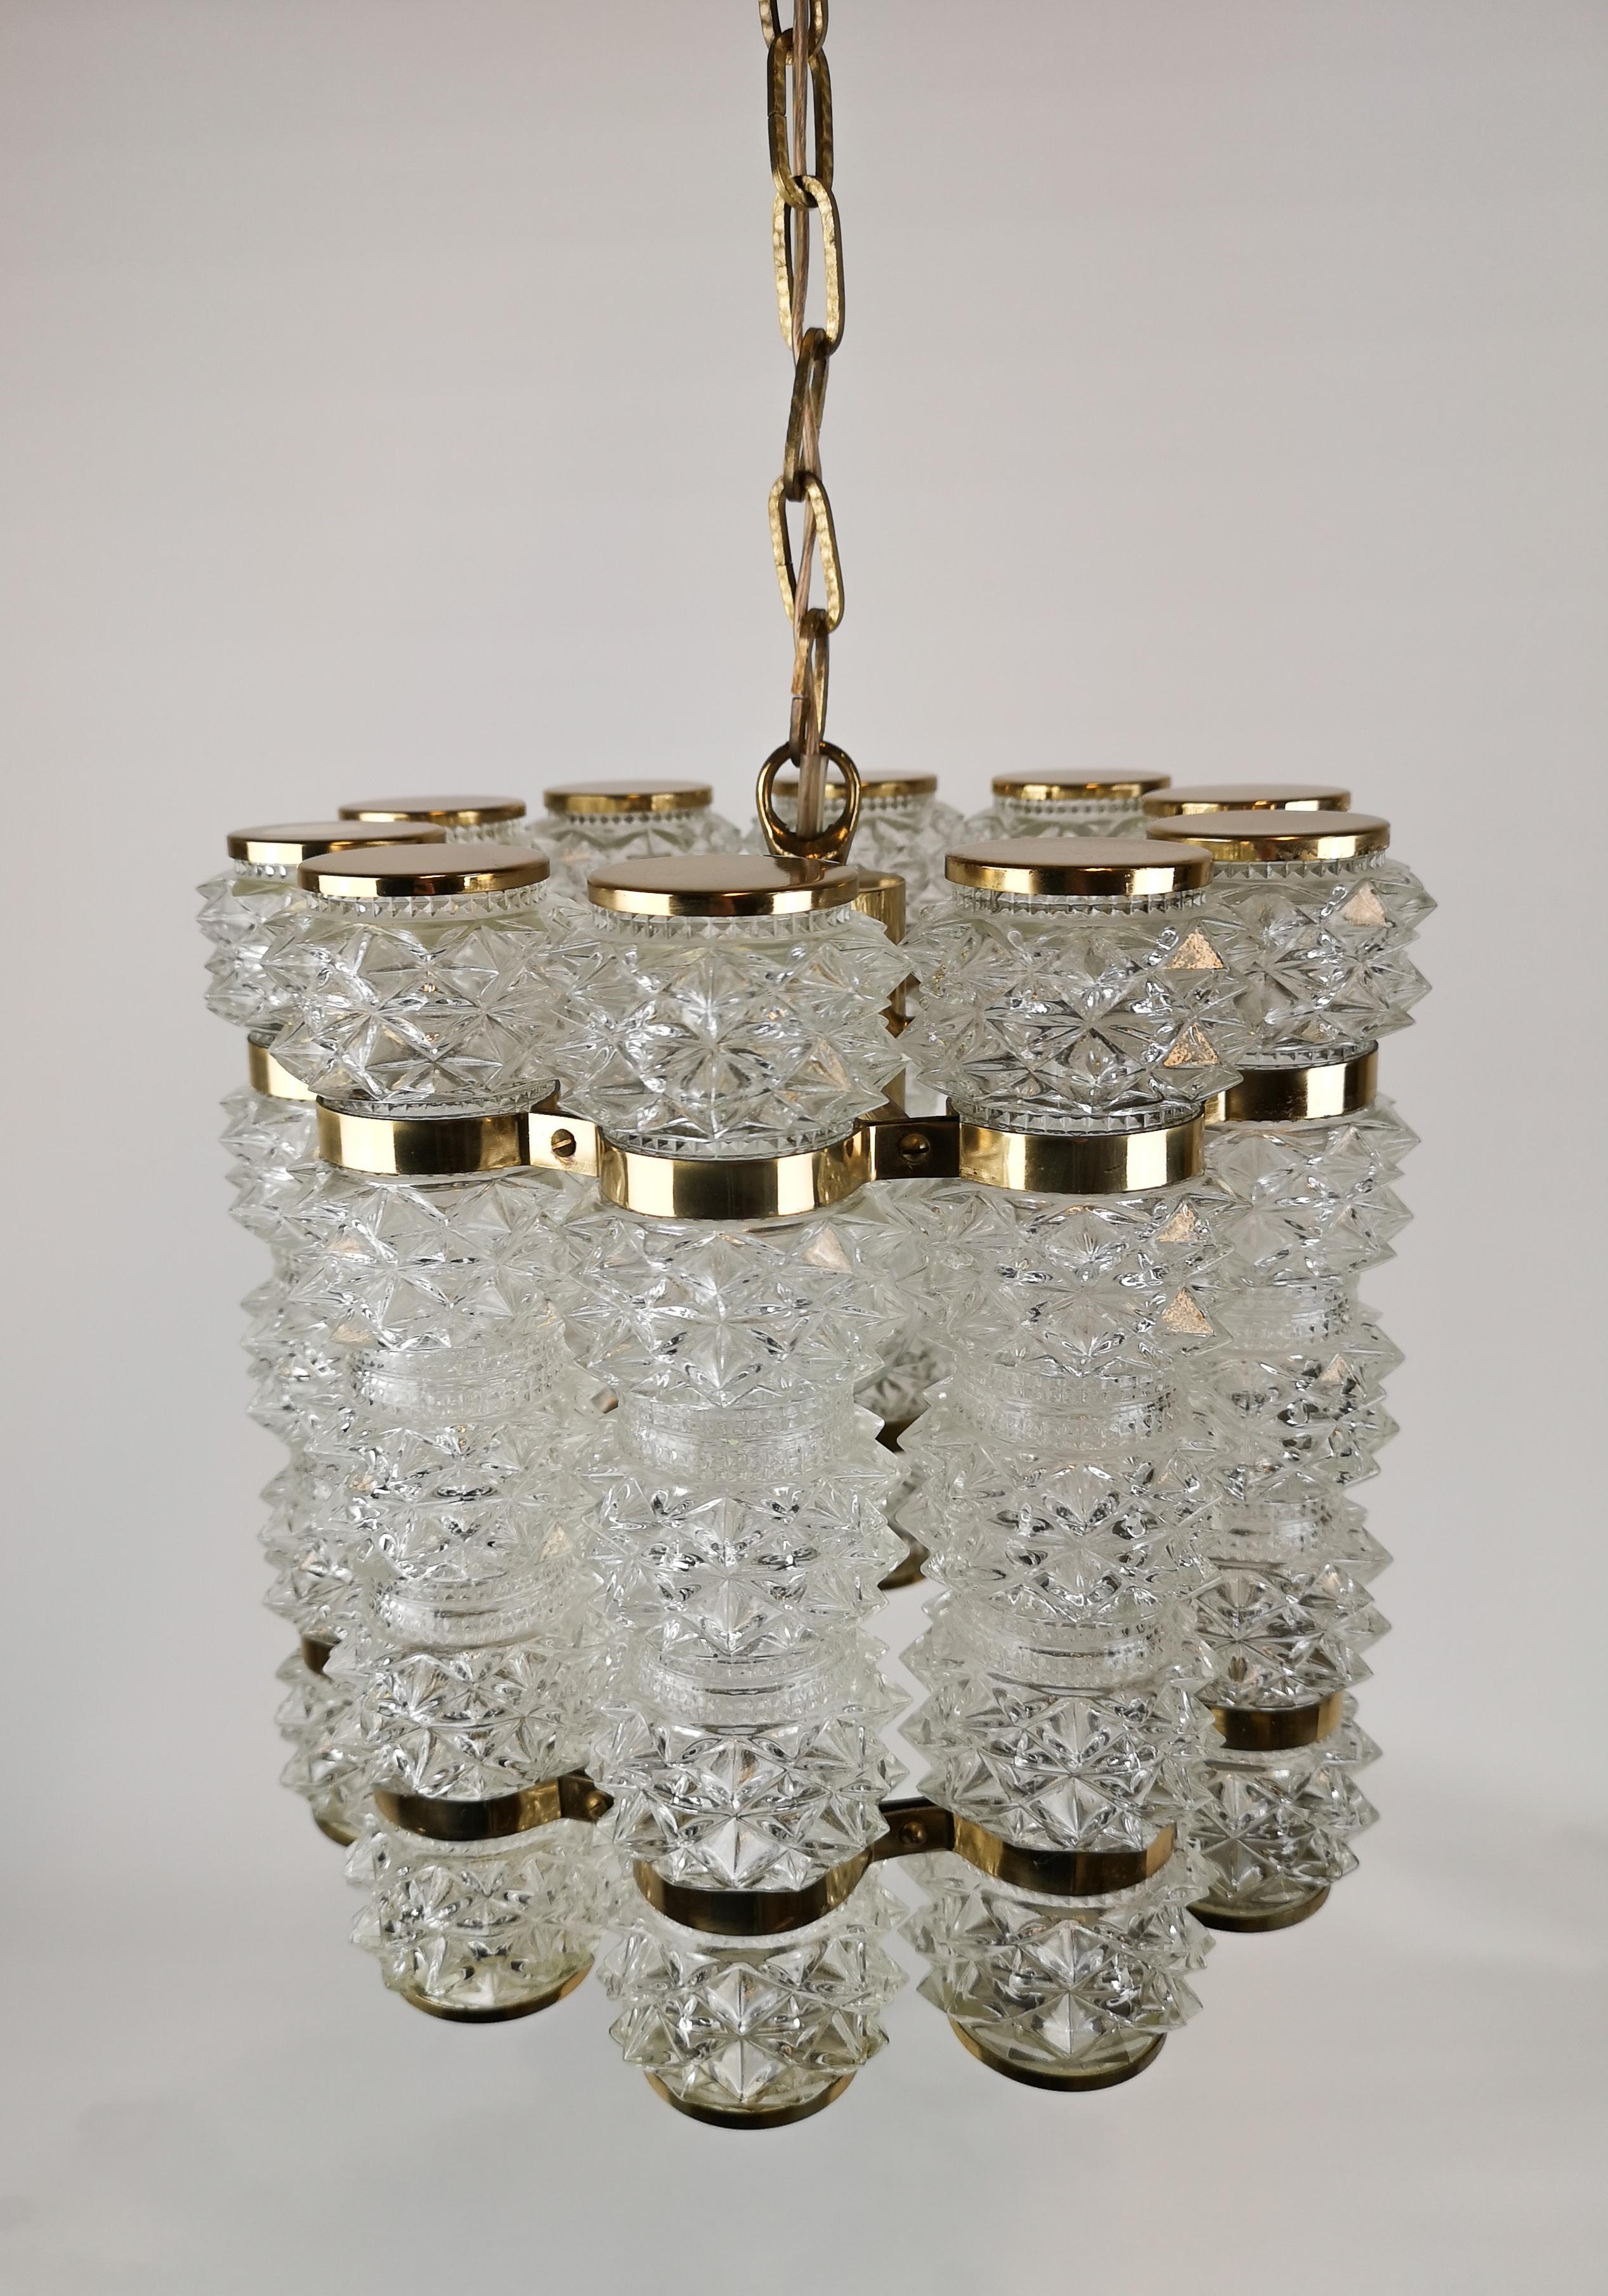 Well-made chandelier with ten cylinder shaped cupolas in crystallized glass and brass fittings.
Designed by Orrefors and manufactured by Tyringe, circa 1960 second half.

The lamp is in very good vintage condition with minor wear consistent with